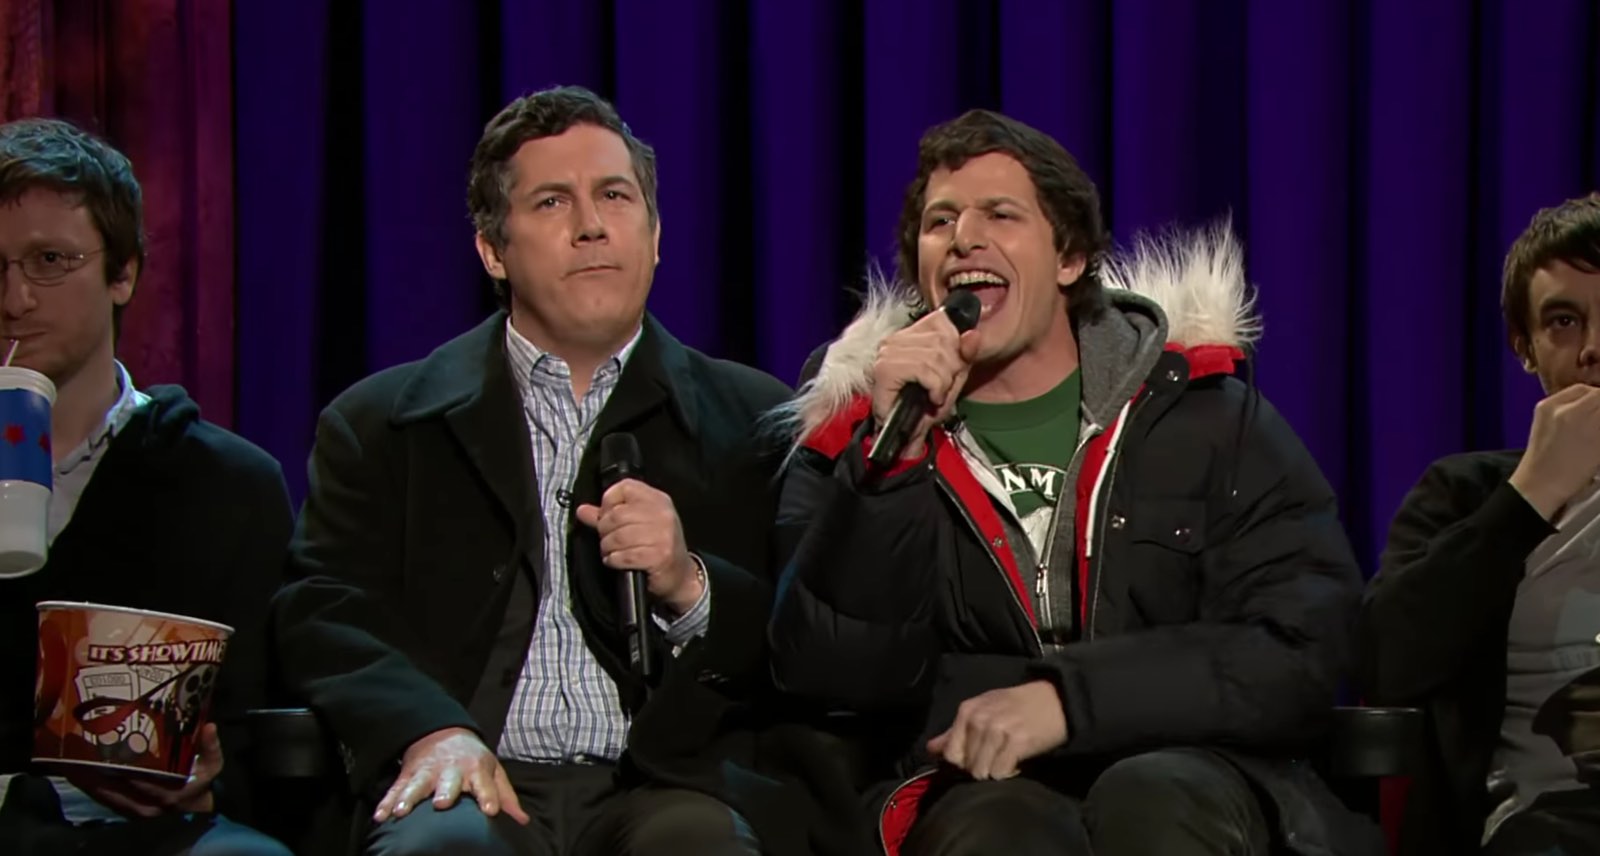 Andy Samberg and Chris Parnell play Lazy Sunday live on Late Night with Jimmy Fallon